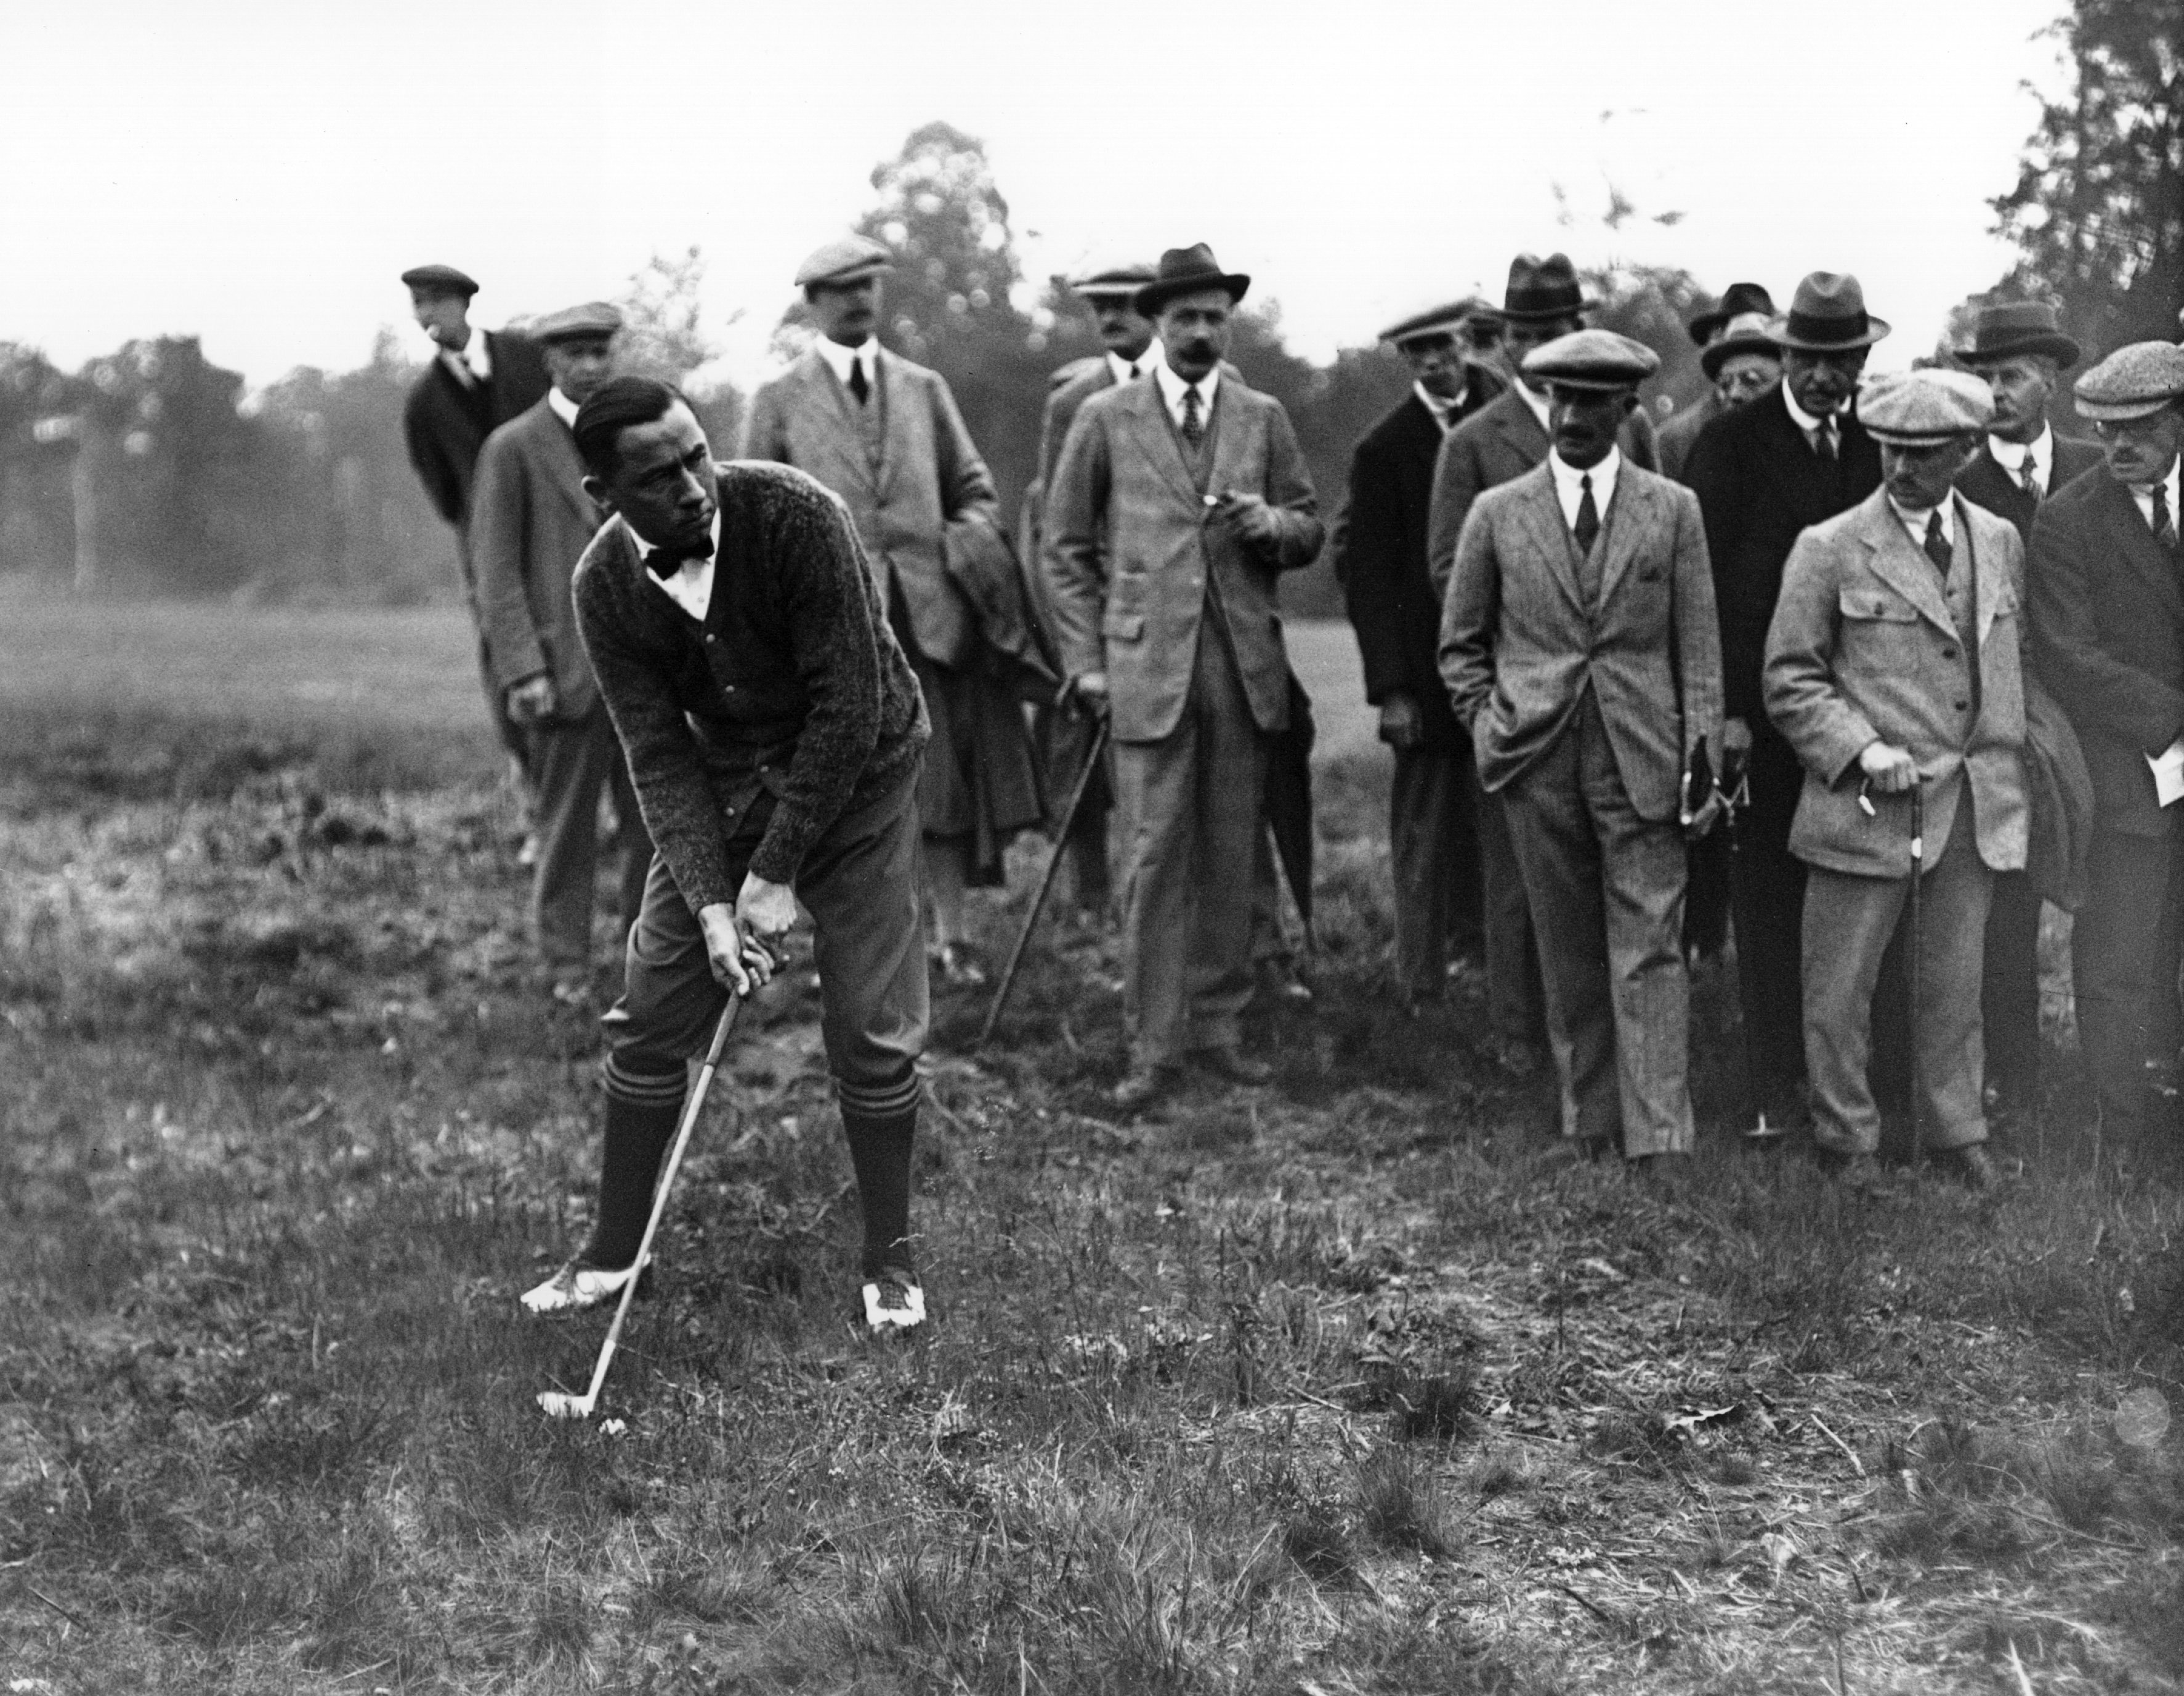 Walter Hagen, Captain of the 1927 US Ryder Cup team. Hagen captained US in the first six Ryder Cups and played on the first five, 1927, 1929, 1931, 1933, and 1935.